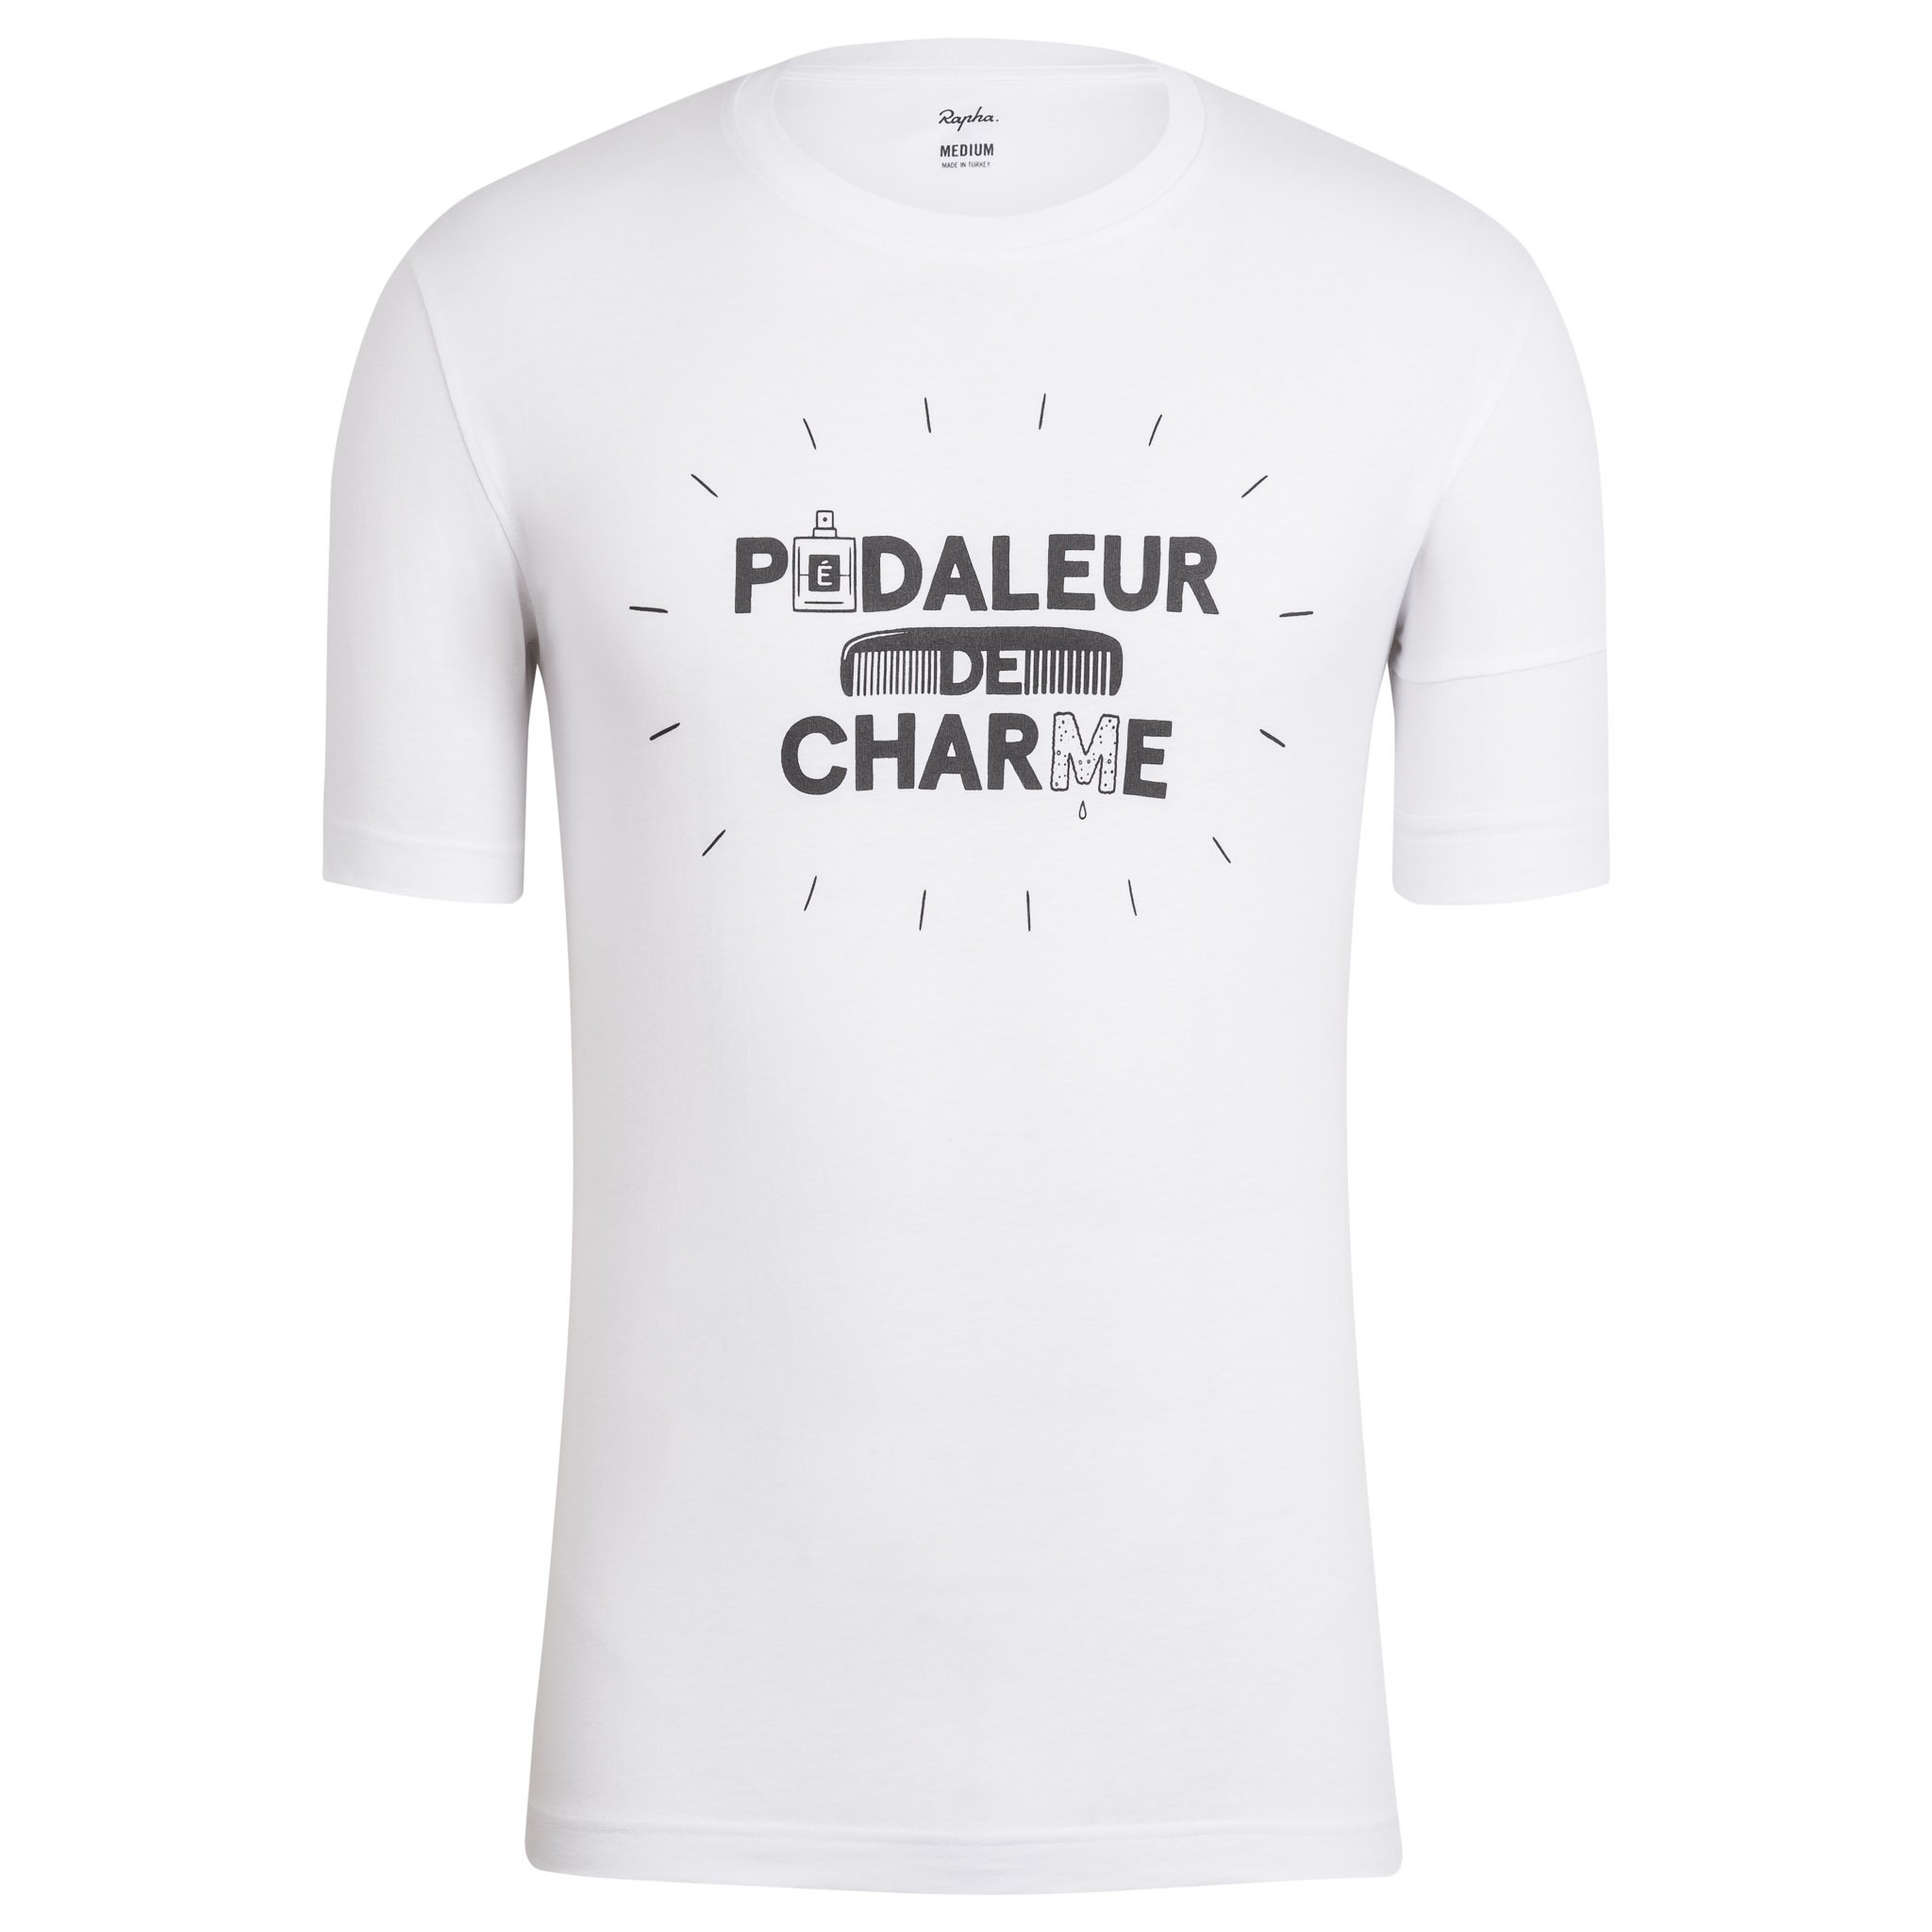 The Cycling Twitter: "Our new Pédaleur de Charme t-shirt, jersey and cap by @rapha go on sale 🎩🎁👍 https://t.co/WIw3iqsbrP" / Twitter